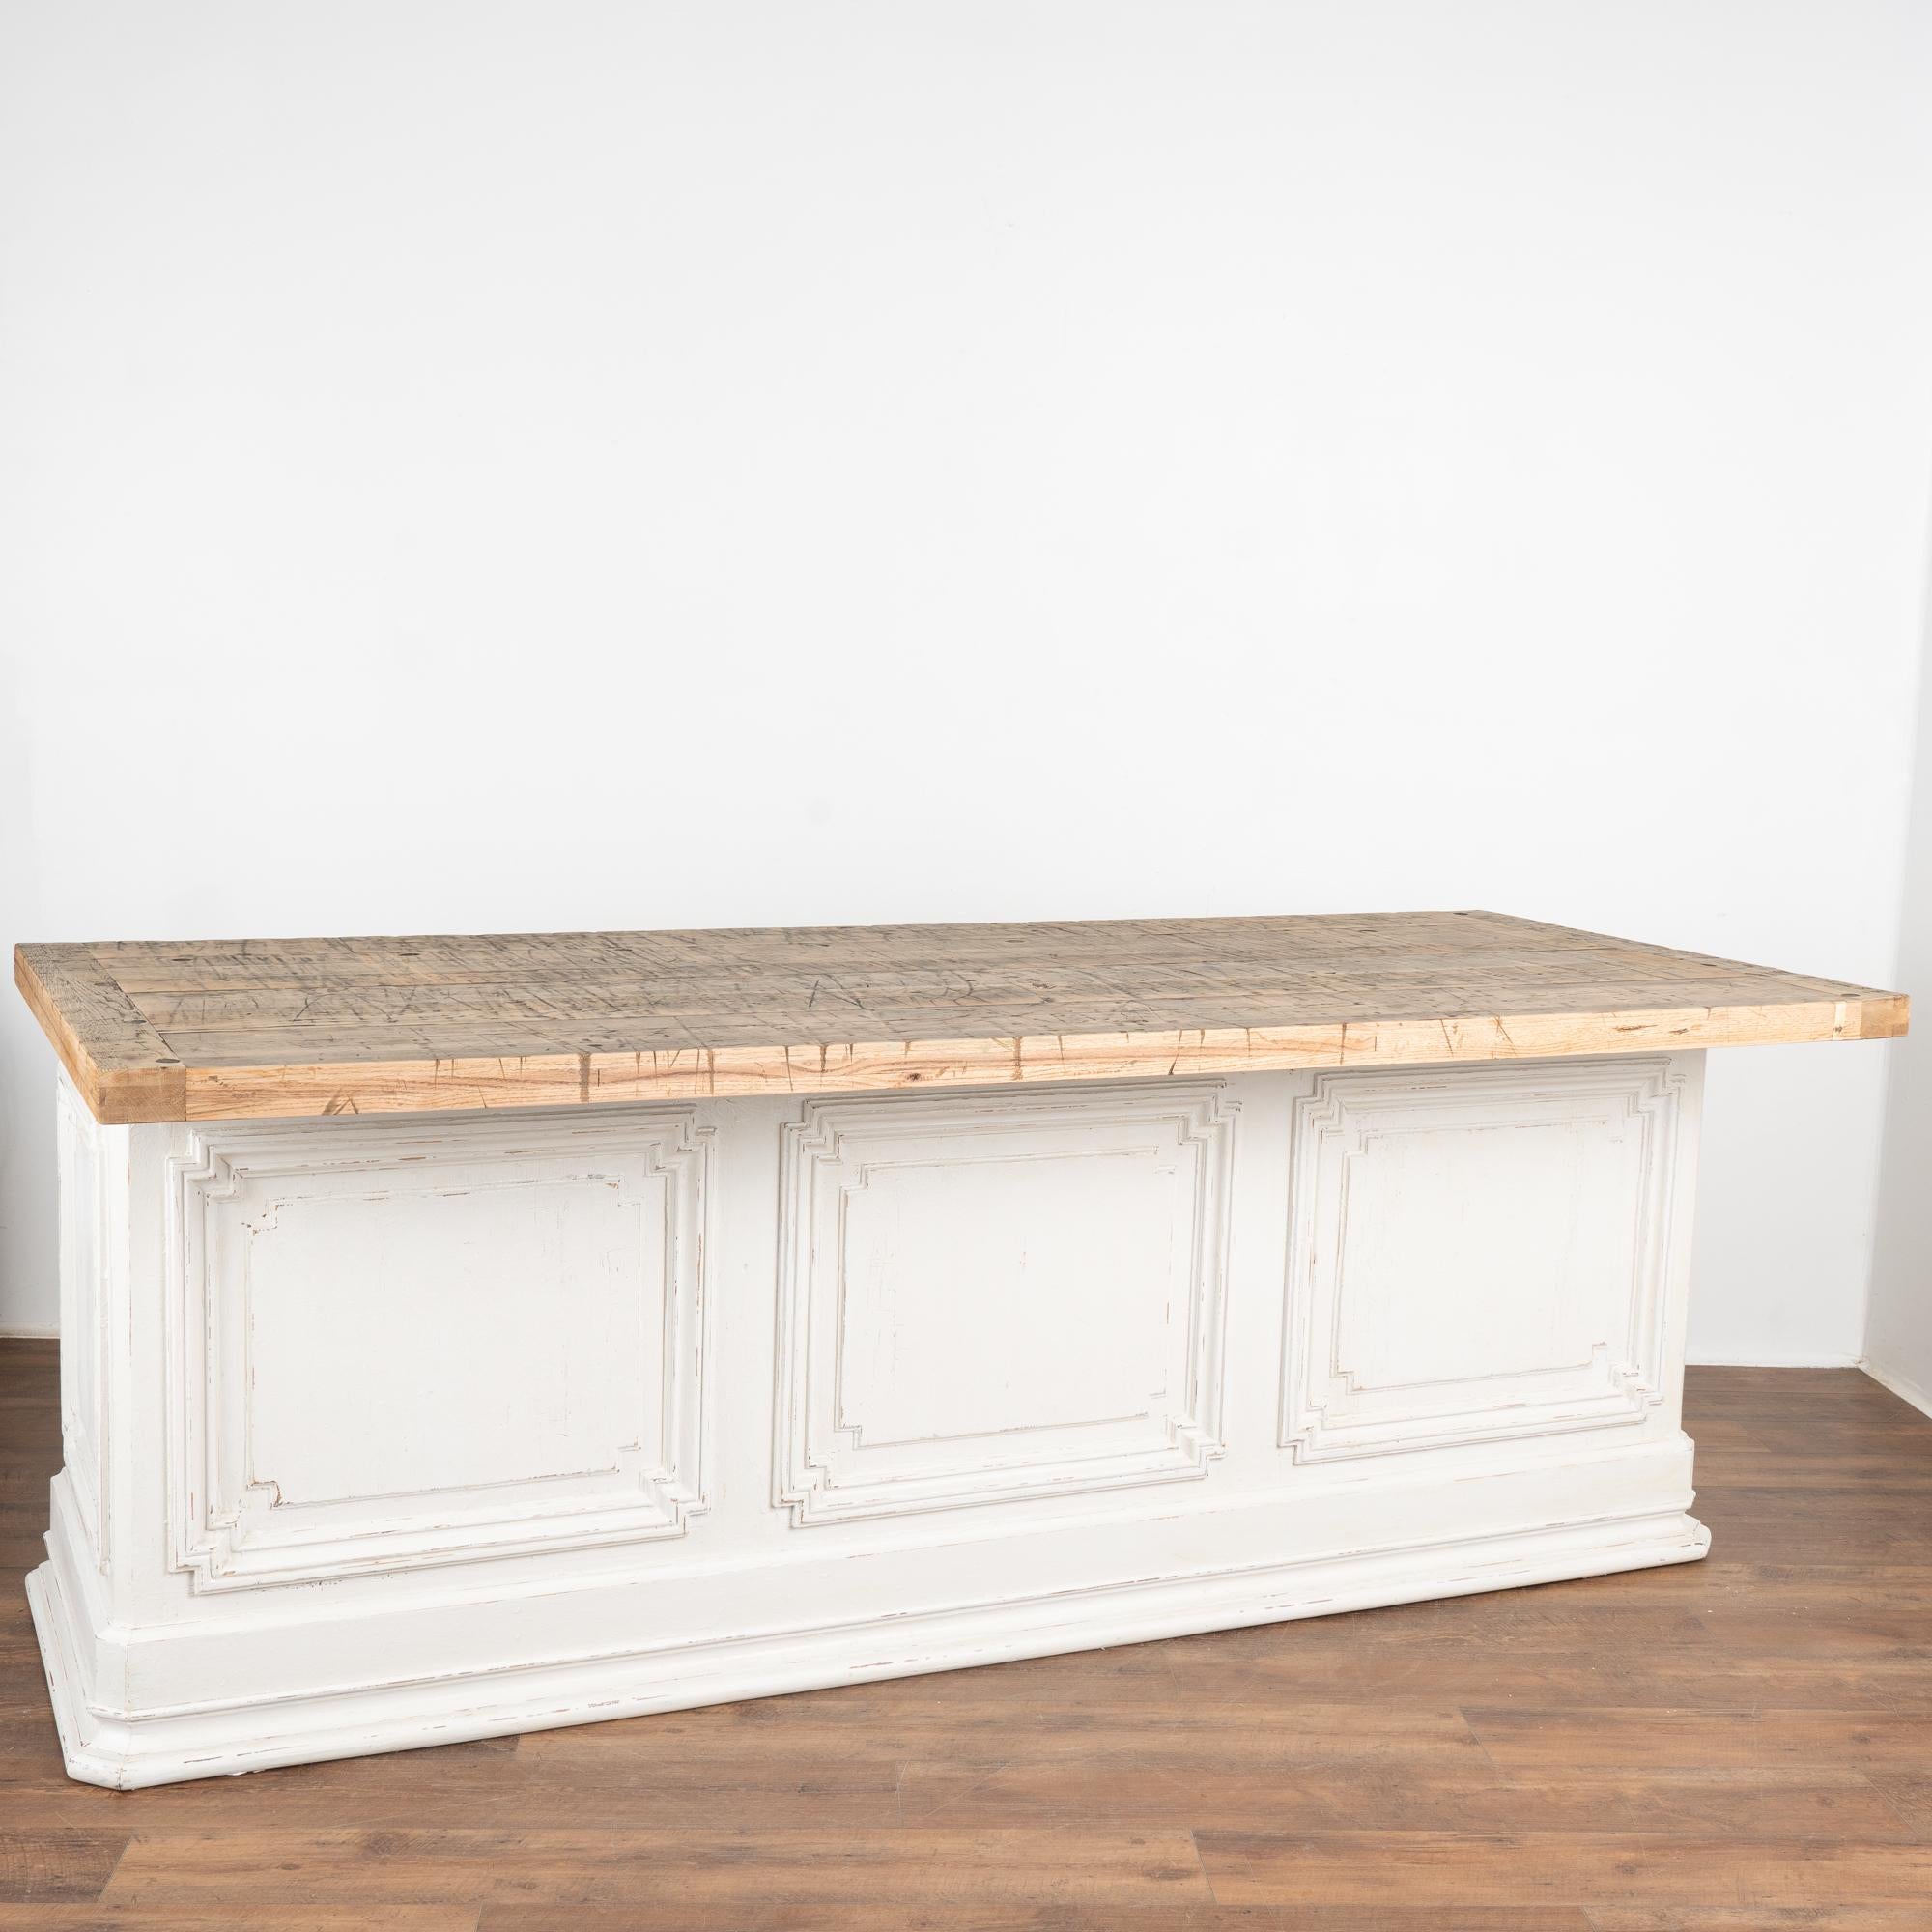 This old shop counter from France has been given new life with a custom professional white painted finish creating a fresh look for a modern kitchen island.
The top is made from old boxcar flooring (from a train); thick and heavy, it is filled with